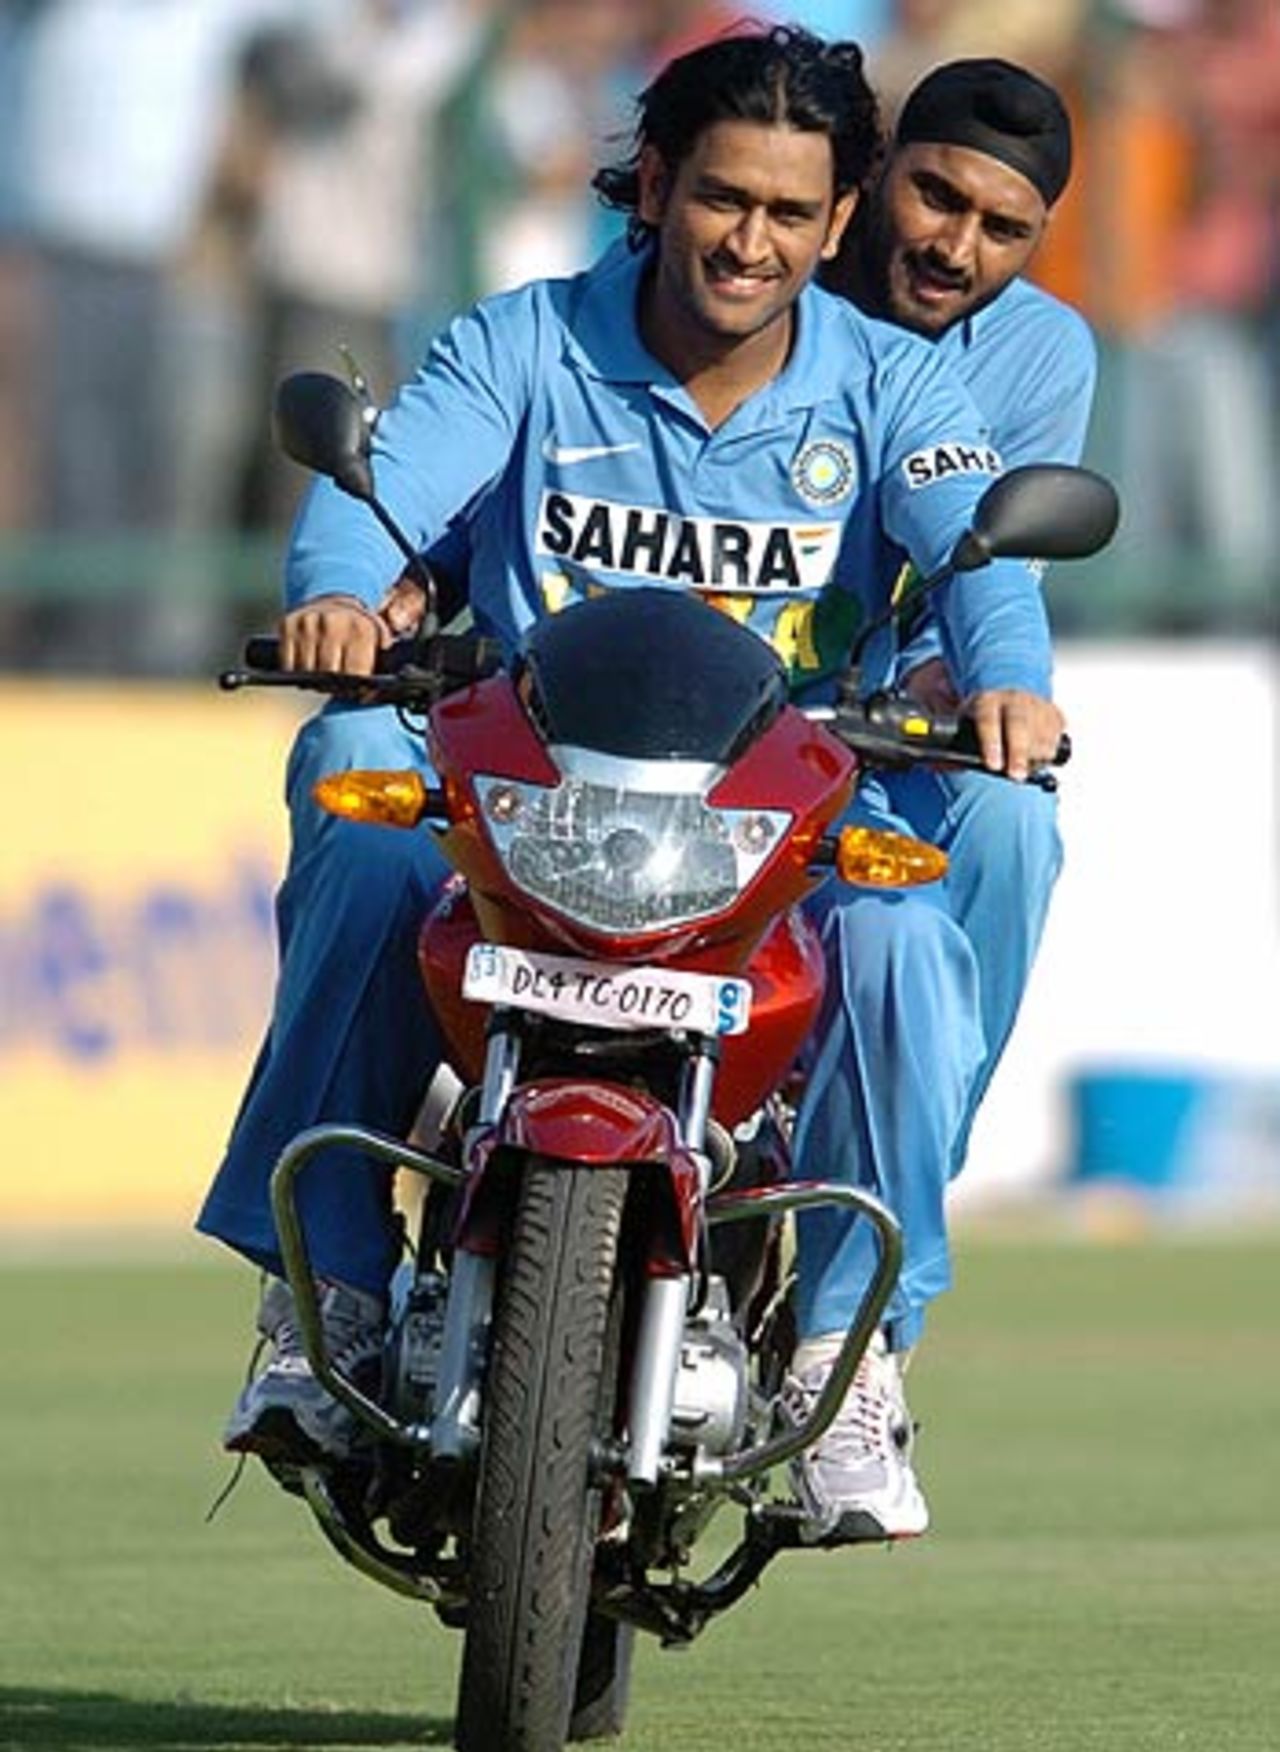 Mahendra Singh Dhoni and Harbhajan Singh take the bike for a spin in the outfield, India v England, 1st ODI, New Delhi, March 28 2006